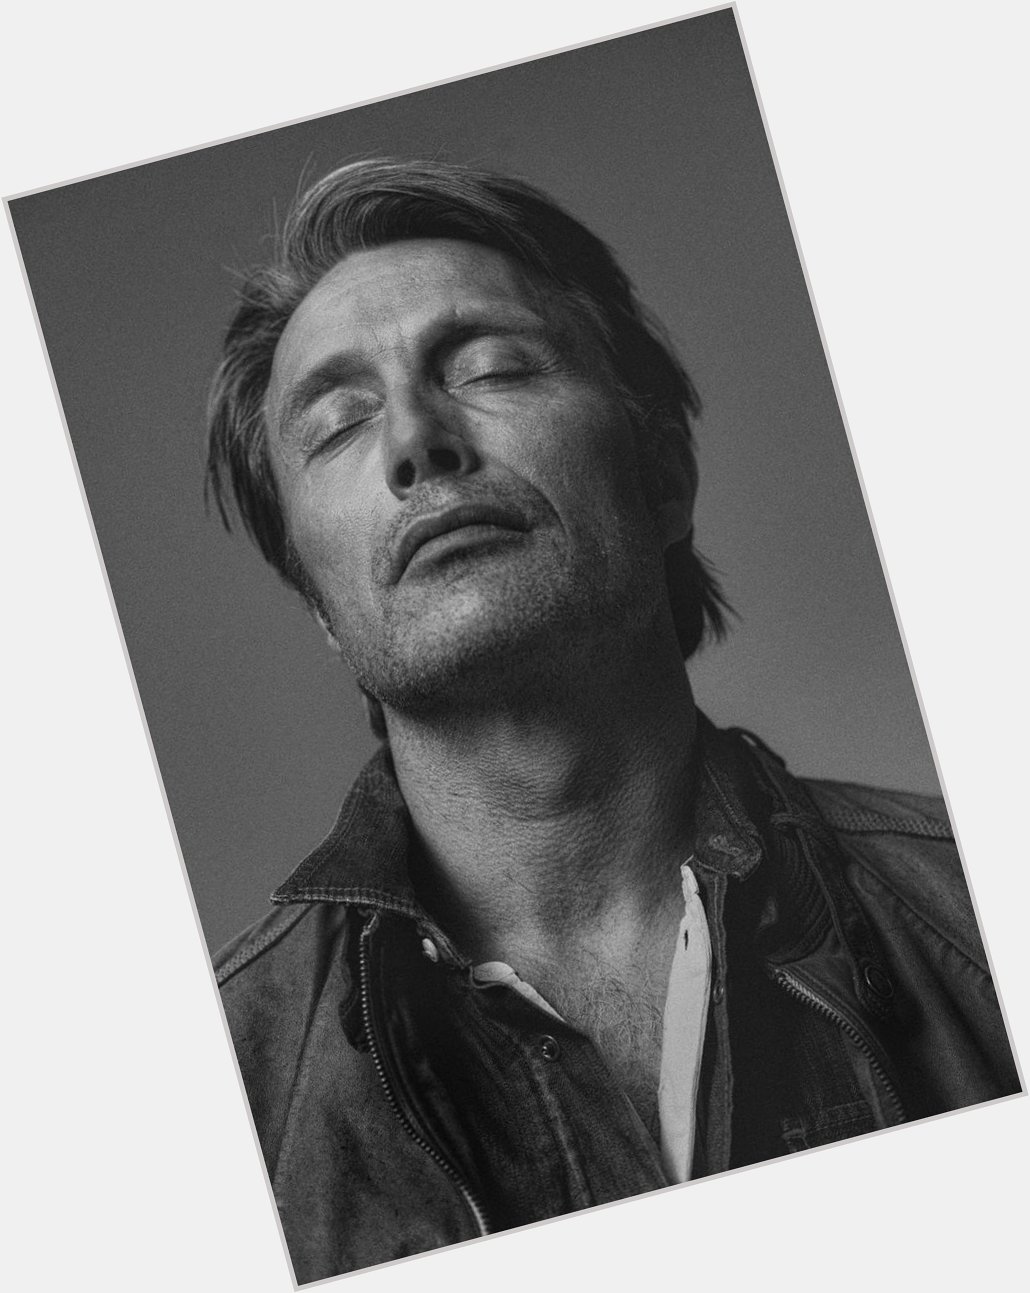 Happy birthday to the king dilf himself, mads mikkelsen!!!  